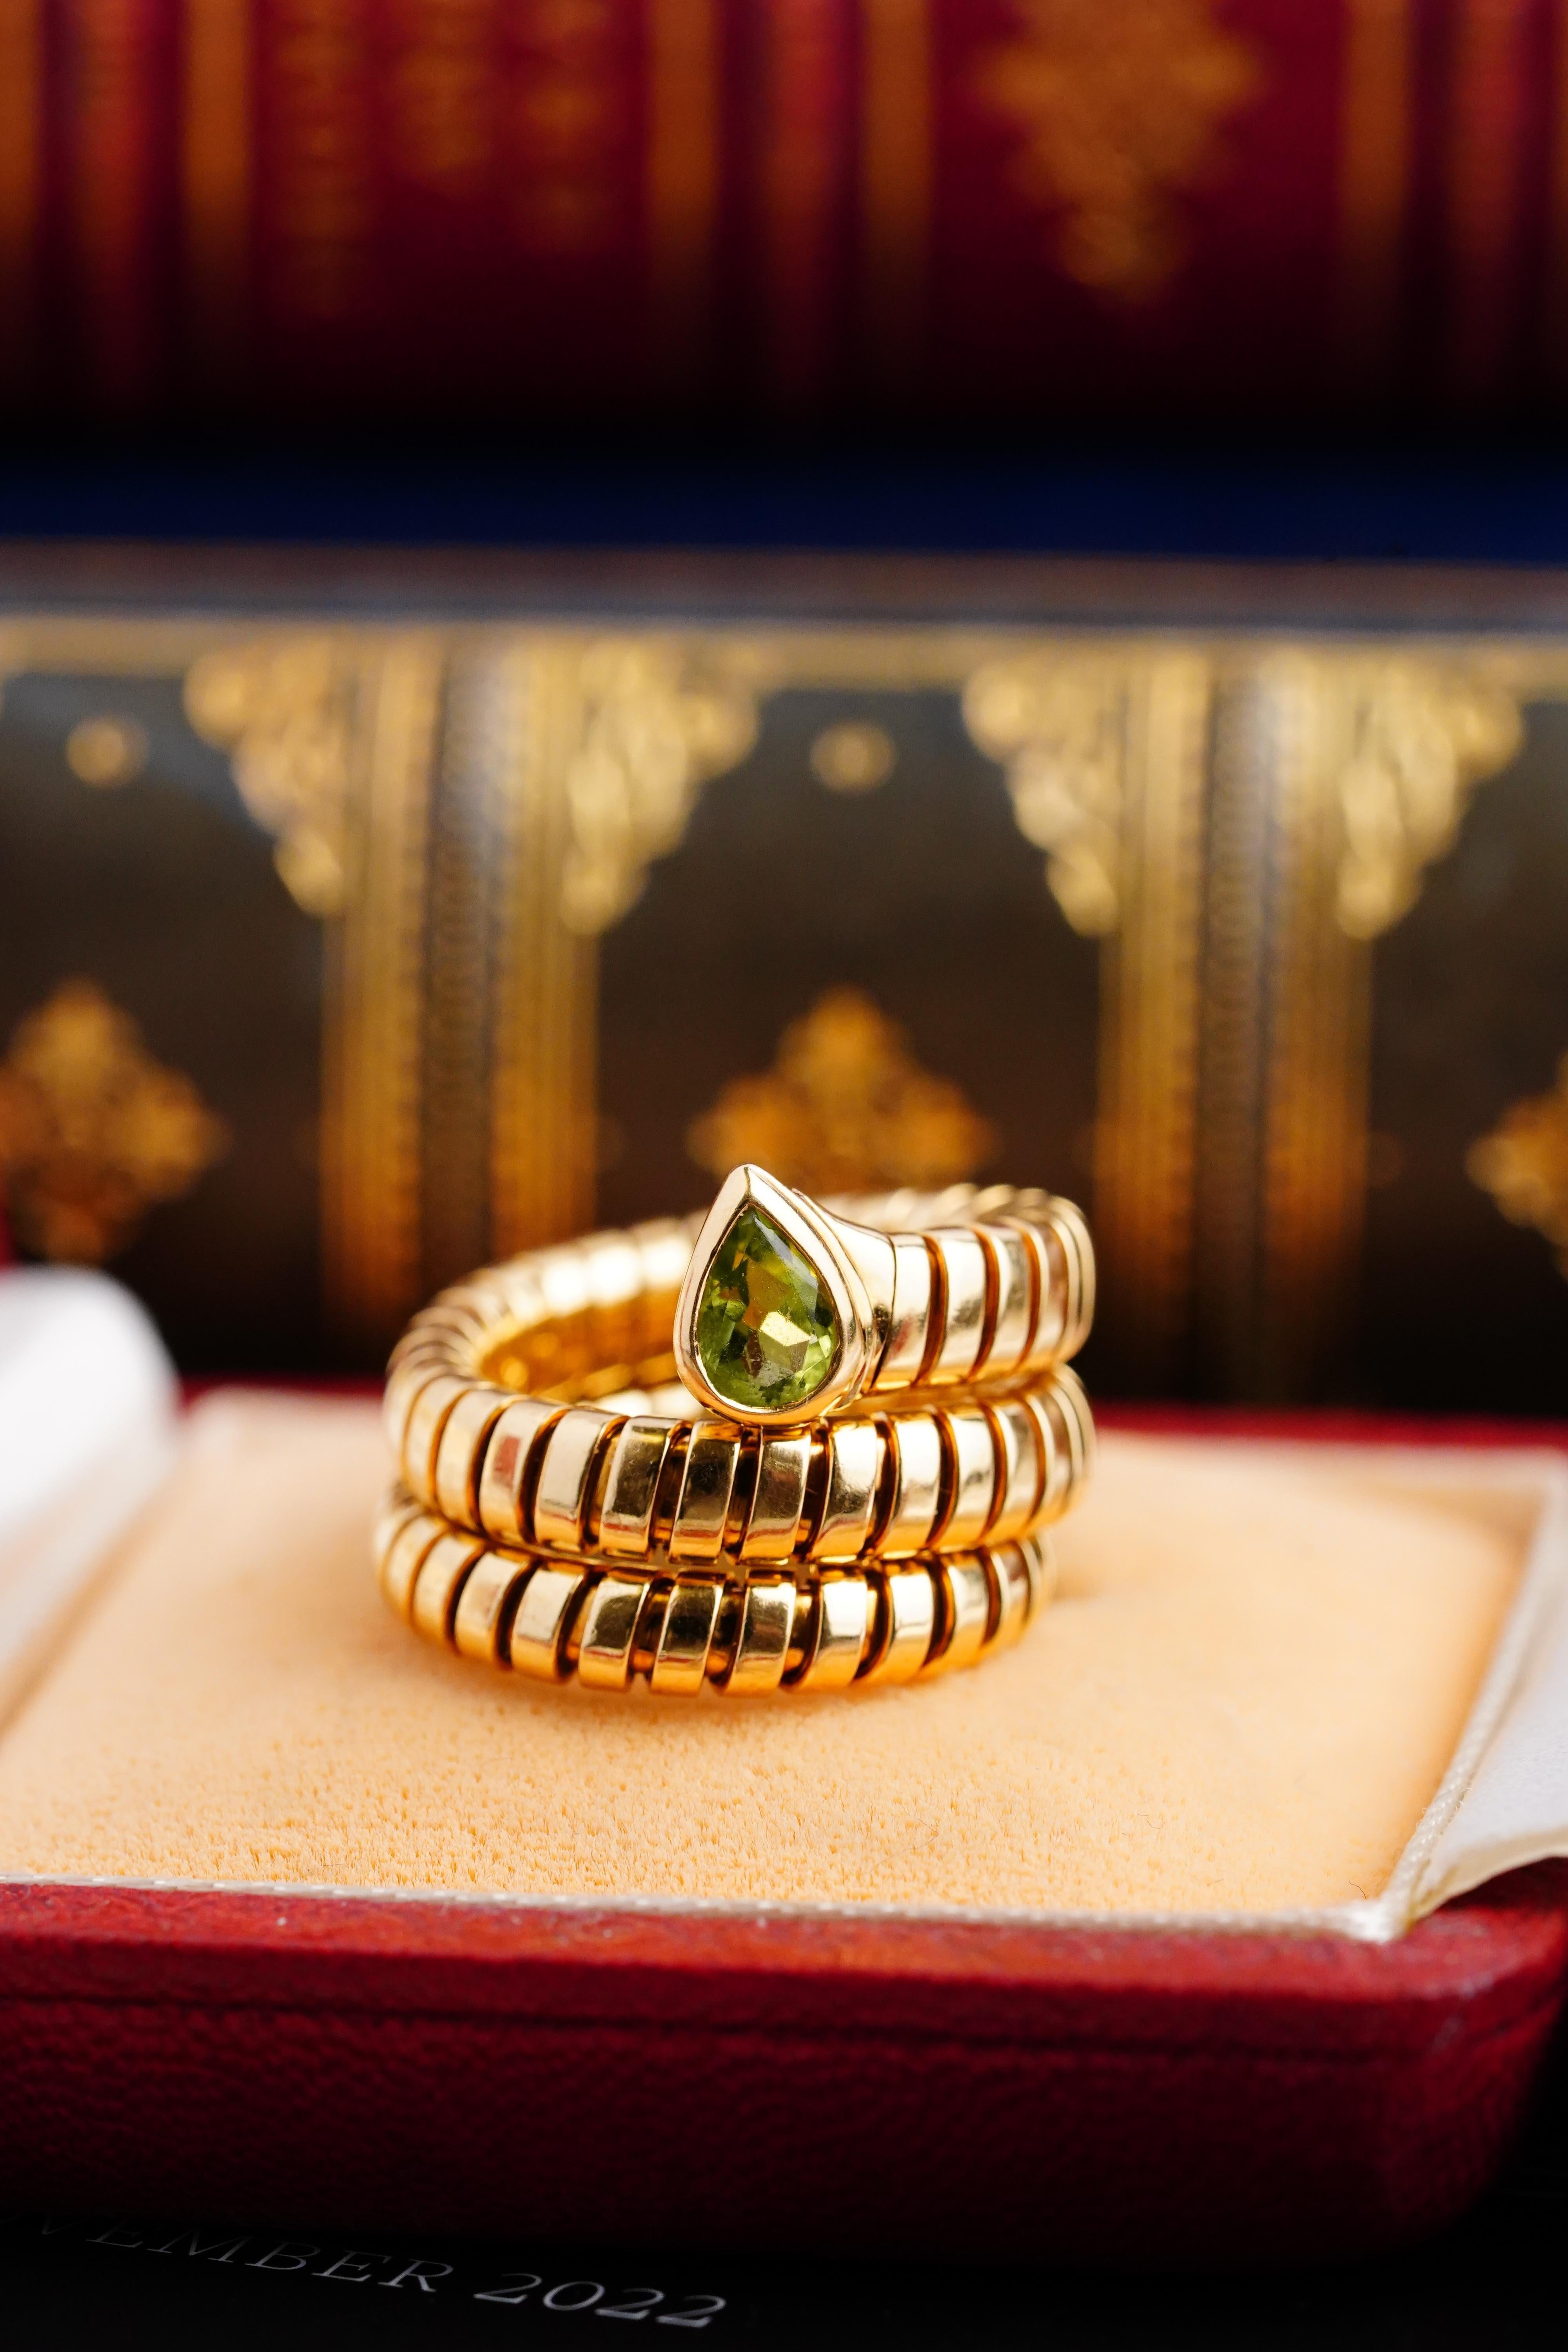 Enjoy this iconic 80s Bvlgari ring, an exquisite piece of jewellery that exudes elegance and luxury. 
The Ring itself is made from high-quality 18K yellow gold and is crafted in Bulgari's signature Serpenti Tubogas collection. Merging two of the